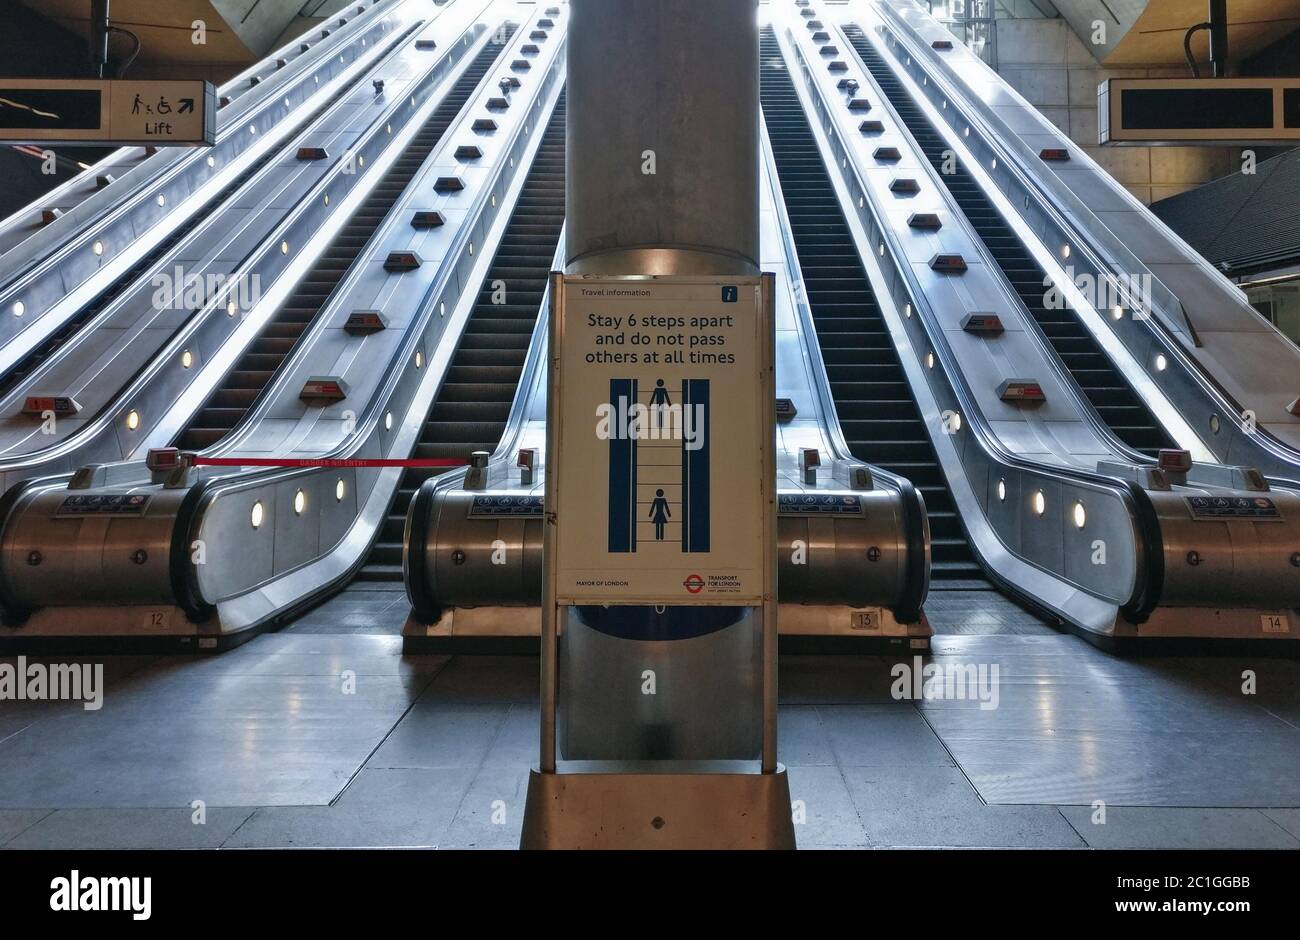 London, United Kingdom - June 14, 2020: Advisory sign prompting people to stand apart and practice social distancing when using escalators in London u Stock Photo